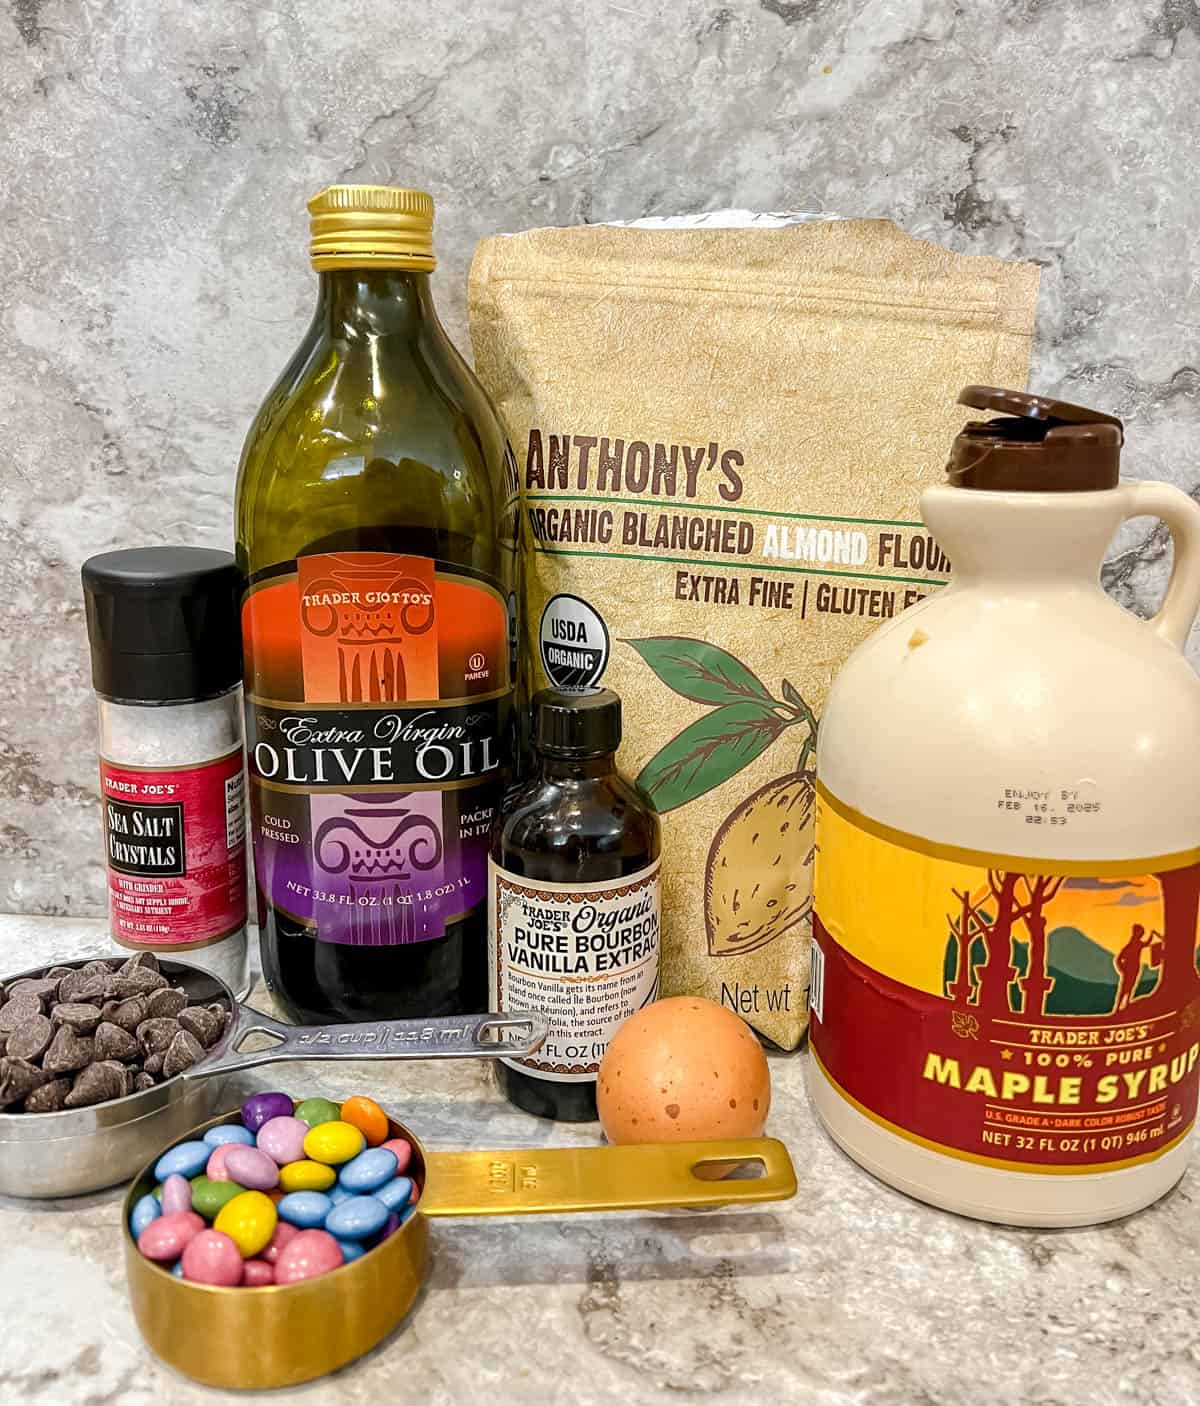 Ingredients needed to make small batch almond flour brownies.